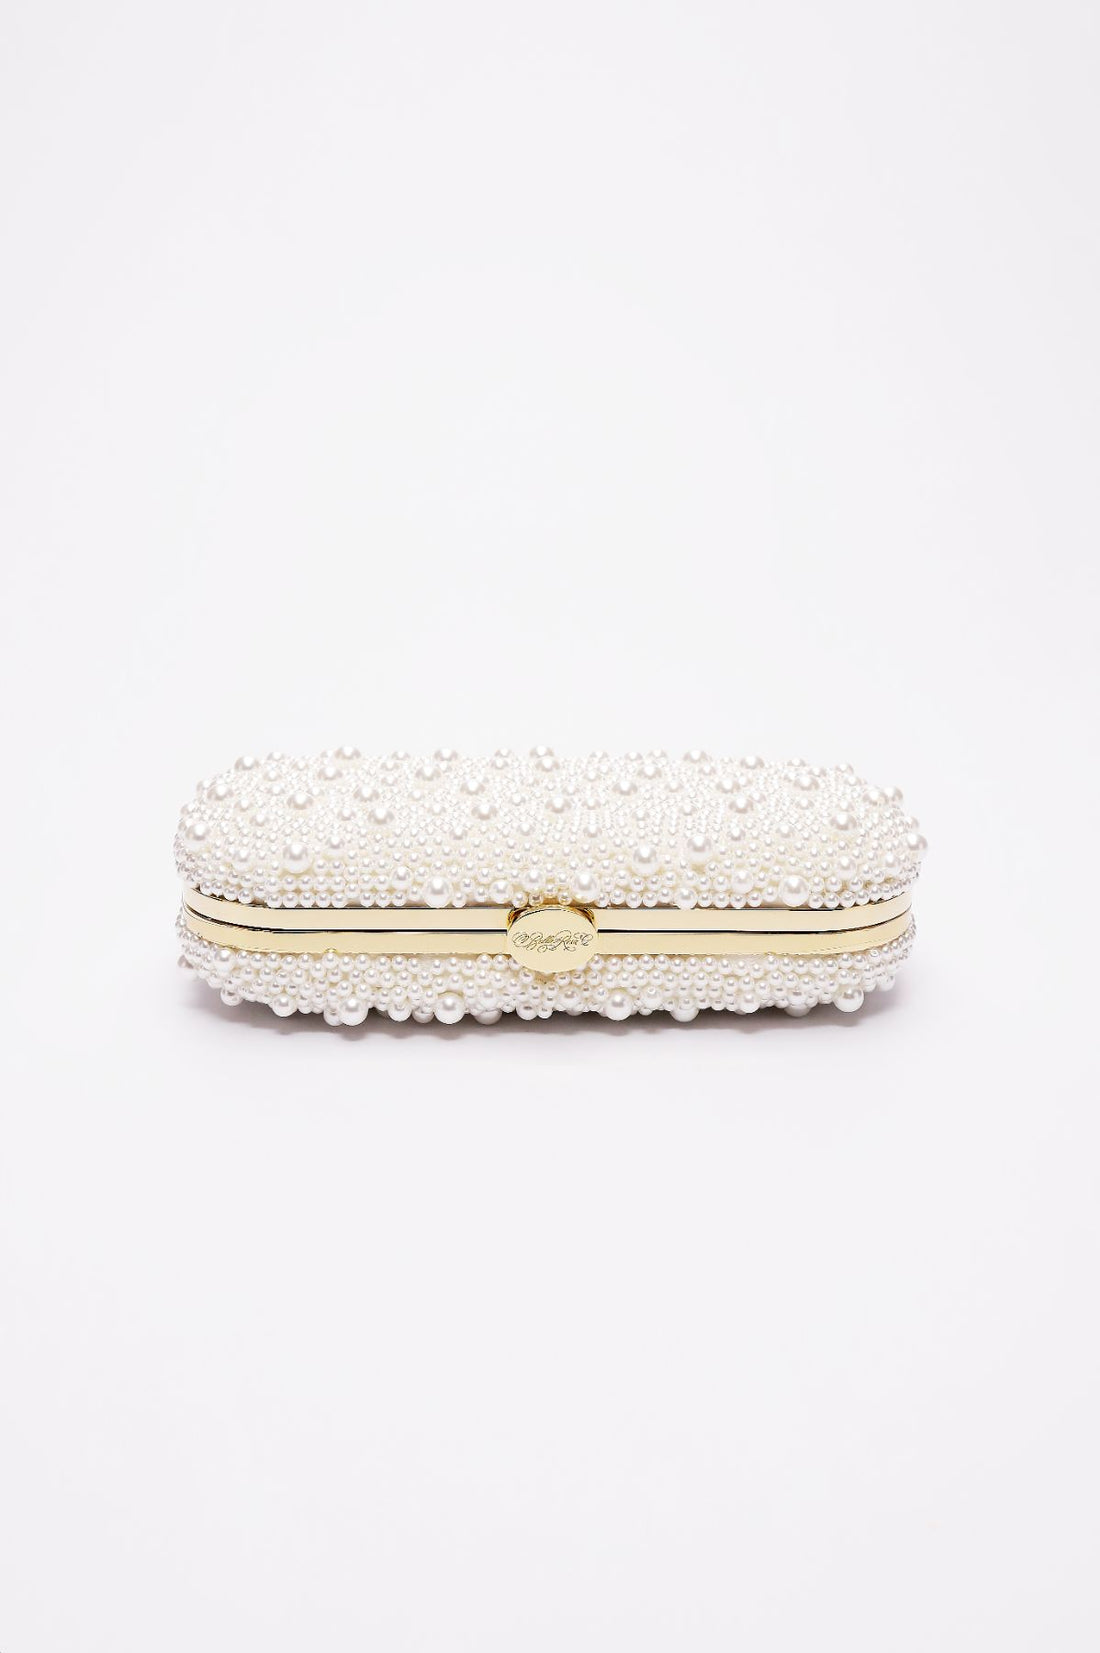 Top closed view of True Love Pearl Bella Clutch satin with gold hardware frame.